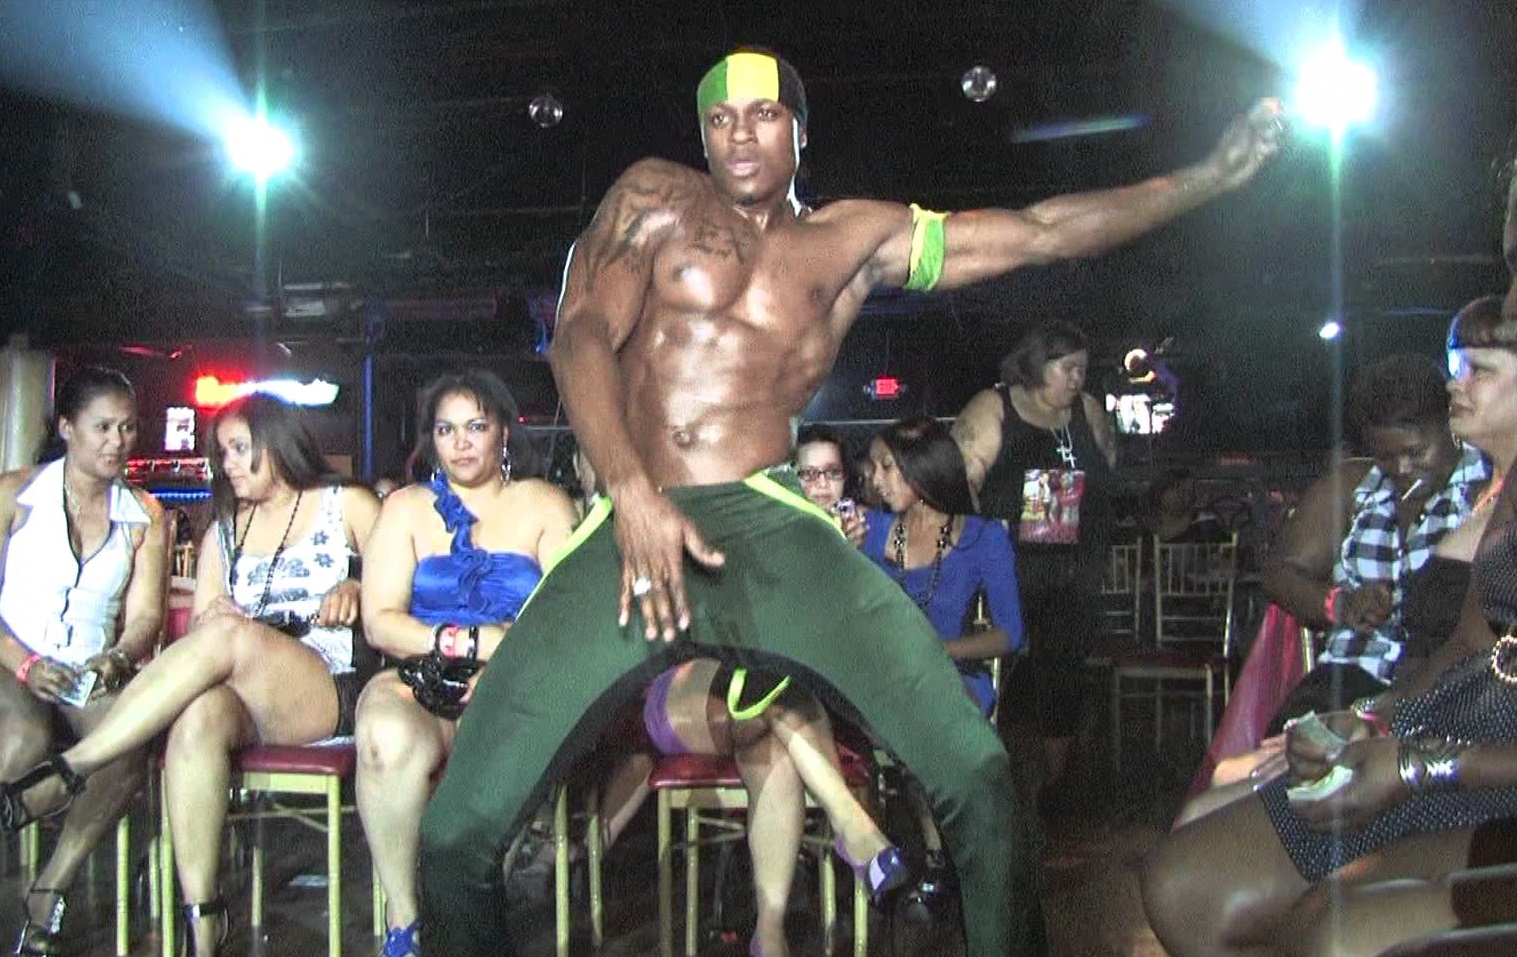 Video Of Black Strippers